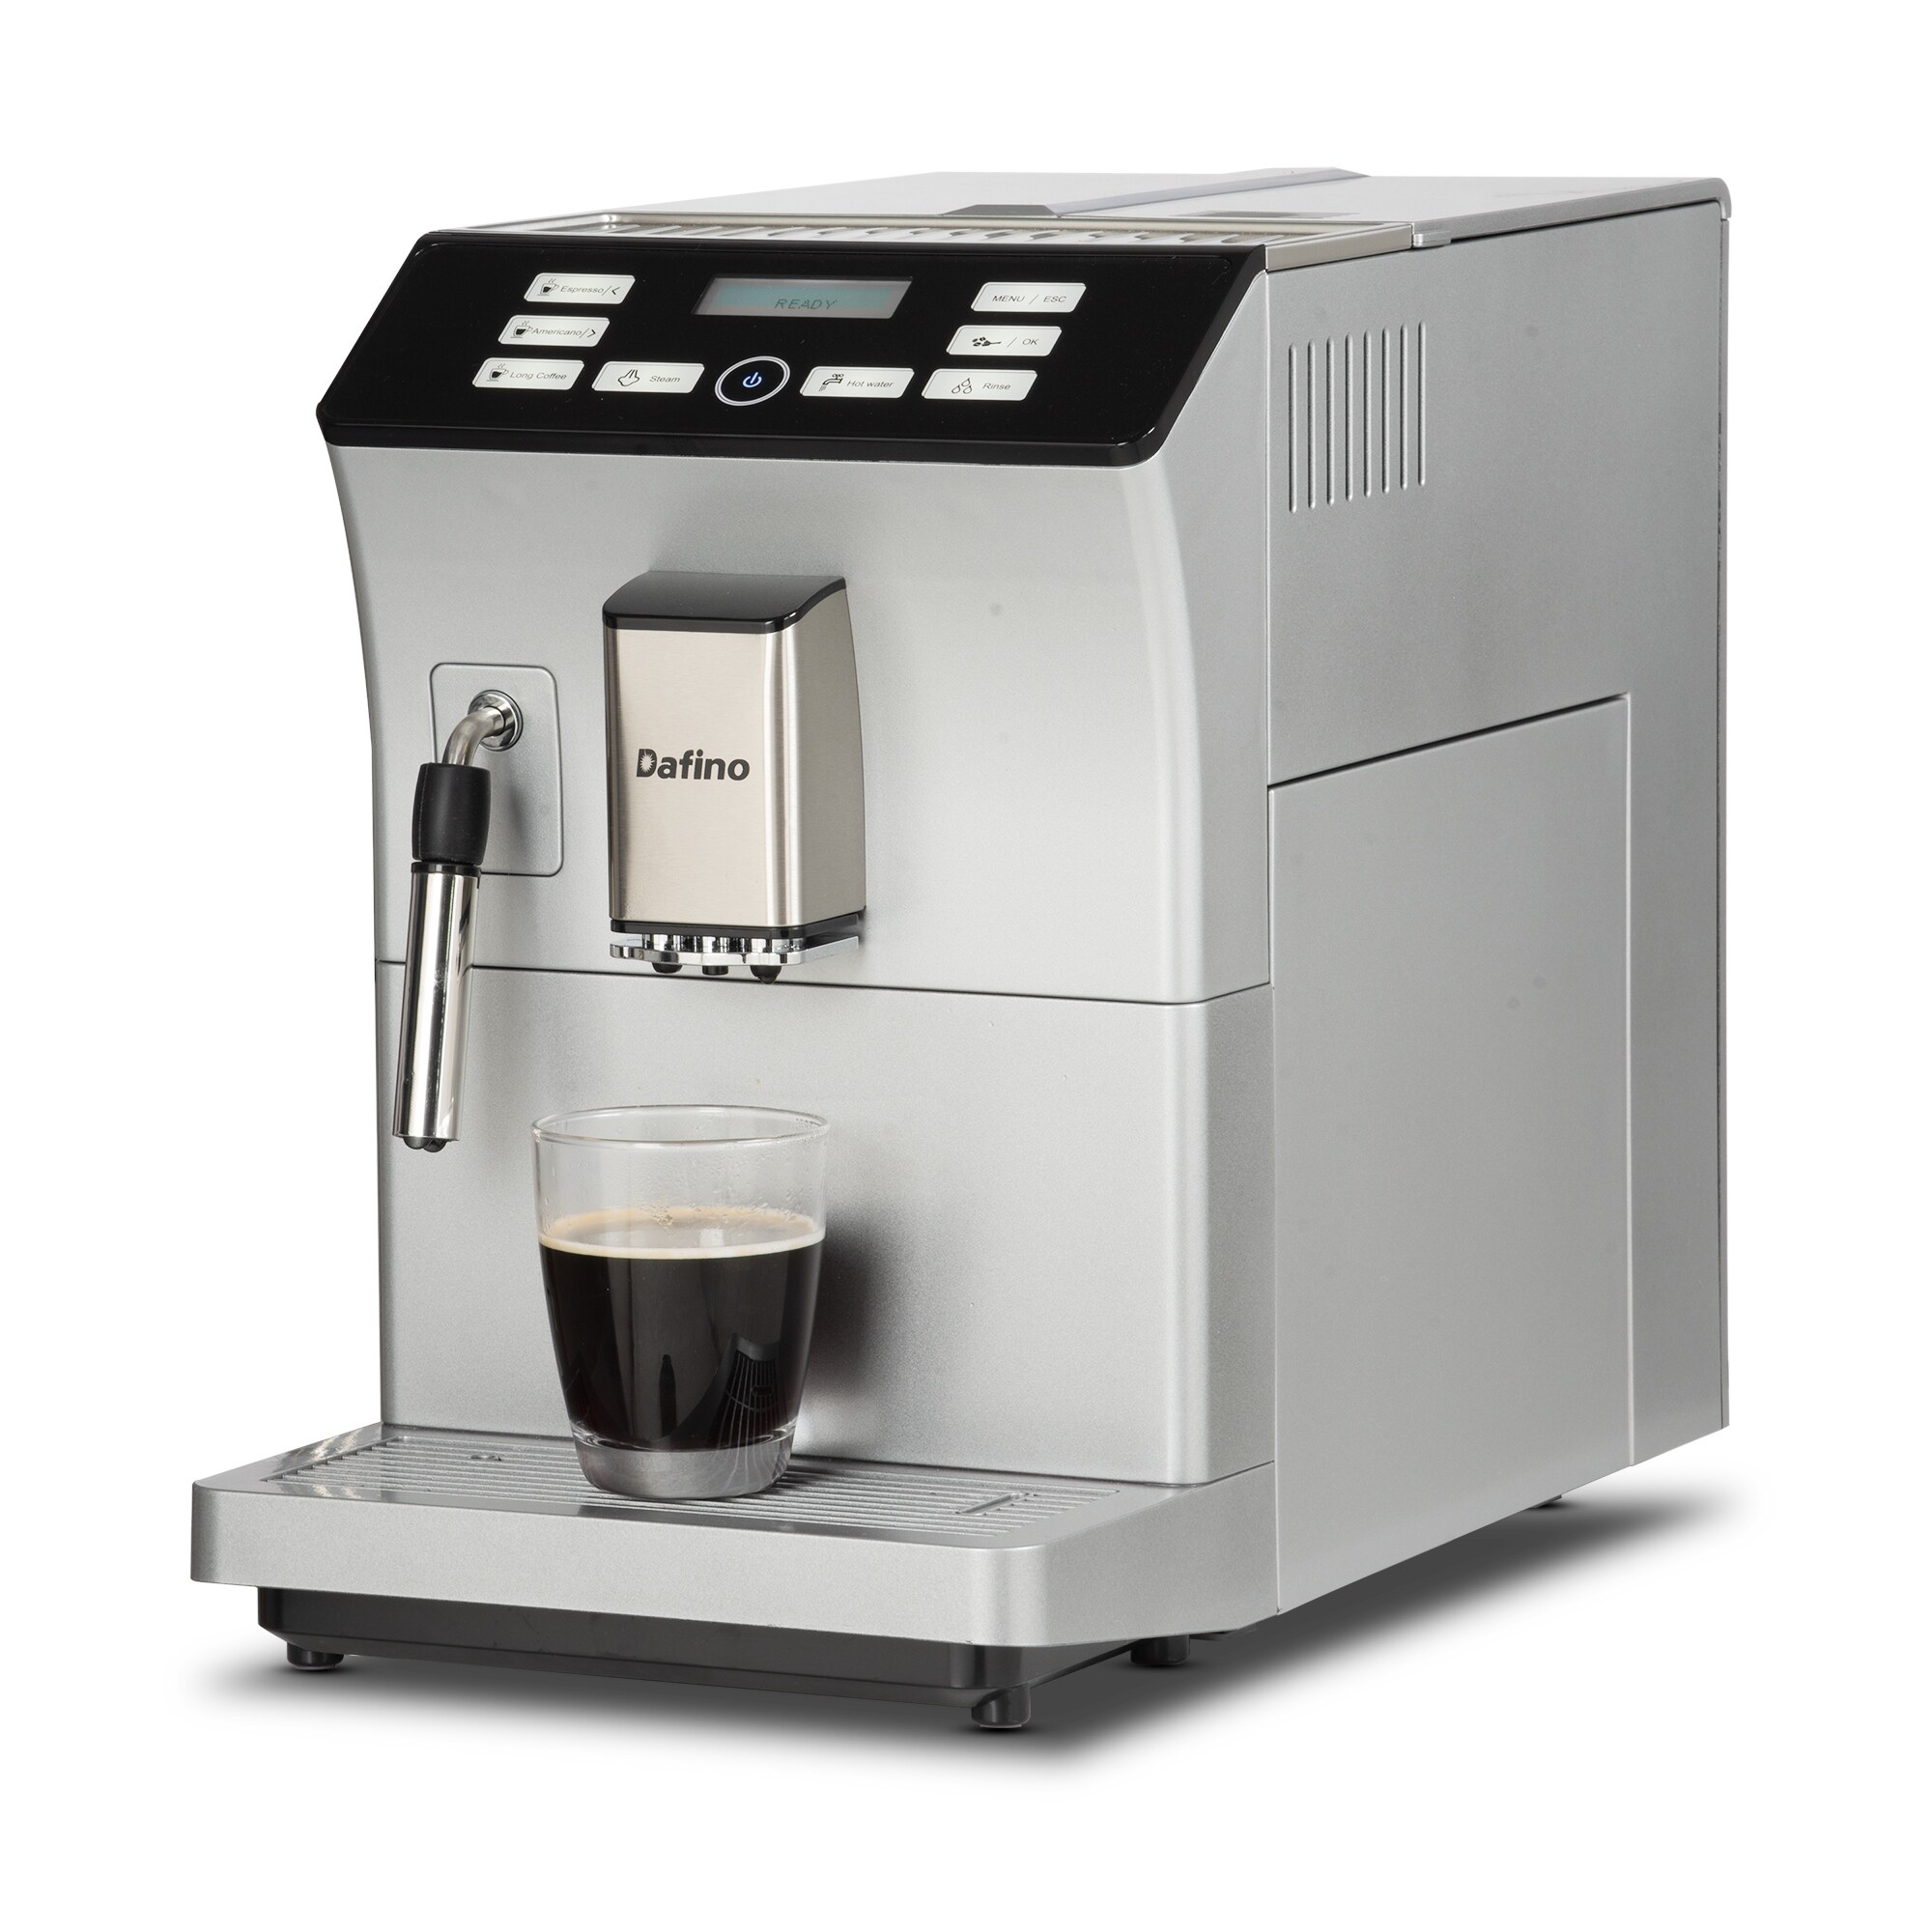 https://ak1.ostkcdn.com/images/products/is/images/direct/8cc09be5f0399737151dbf87442d91b9b1794560/Fully-Automatic-Espresso-Machine-with-Milk-Frother-Silver-Enjoy-Freshly-Ground-Italian-Style-Coffee-with-One-Click.jpg